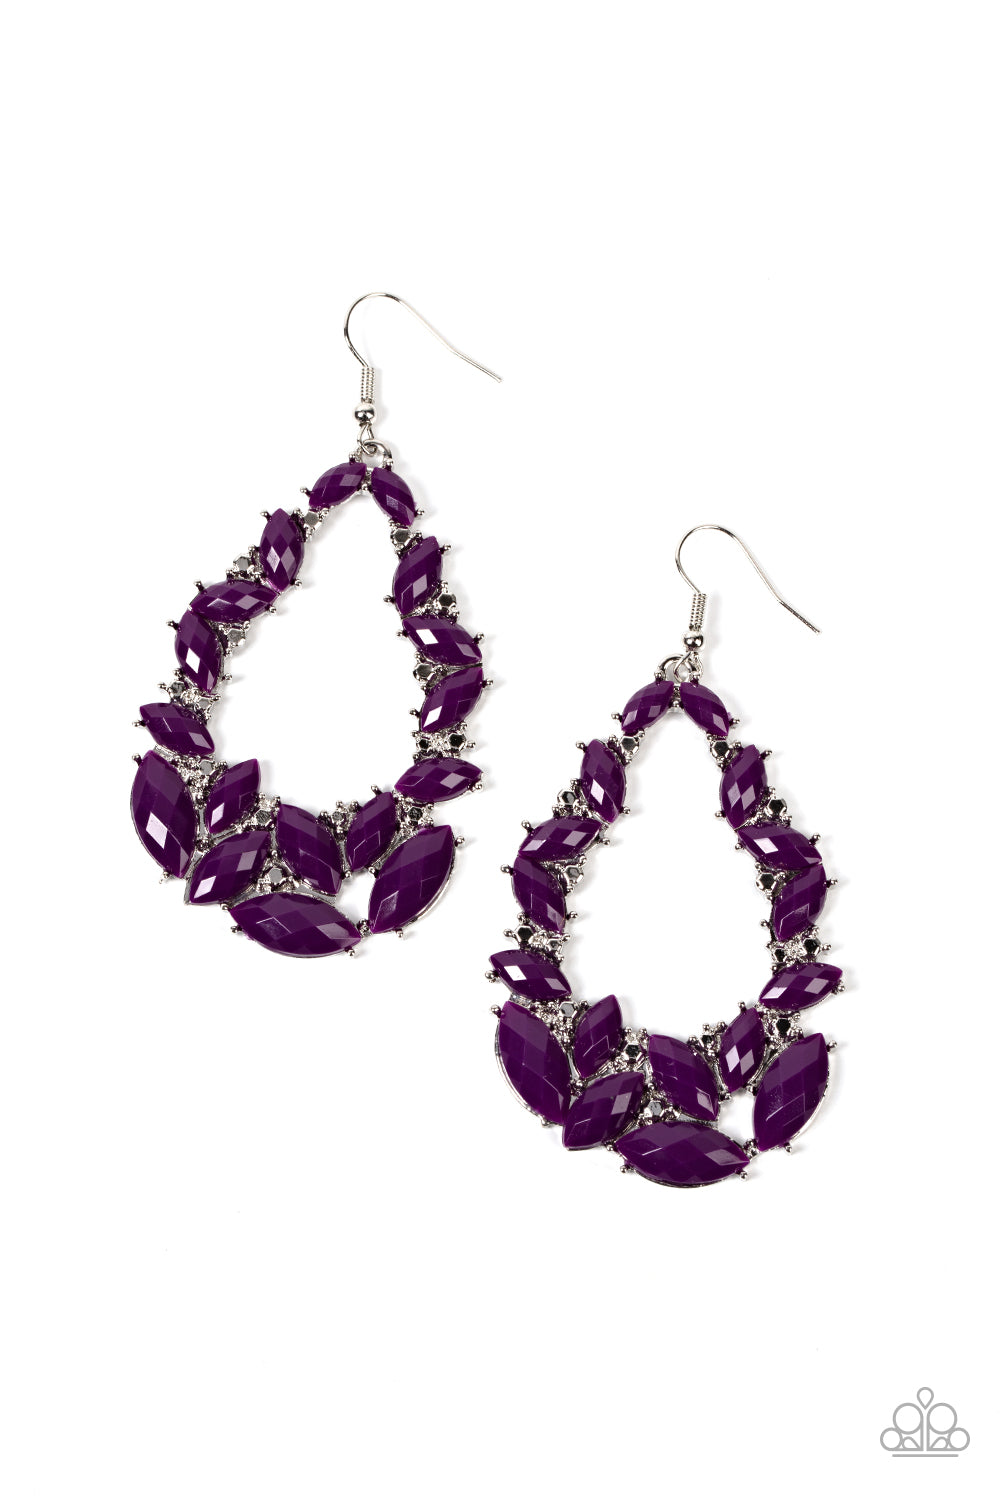 Tenacious Treasure - Purple Teardrop Earrings  featuring pronged silver fittings, a glimmering collection of faceted plum marquise beads coalesce into a glamorous teardrop. Faceted silver accents are sprinkled through the design, adding a spritz of metallic shimmer. Earring attaches to a standard fishhook fitting.  Sold as one pair of earrings.